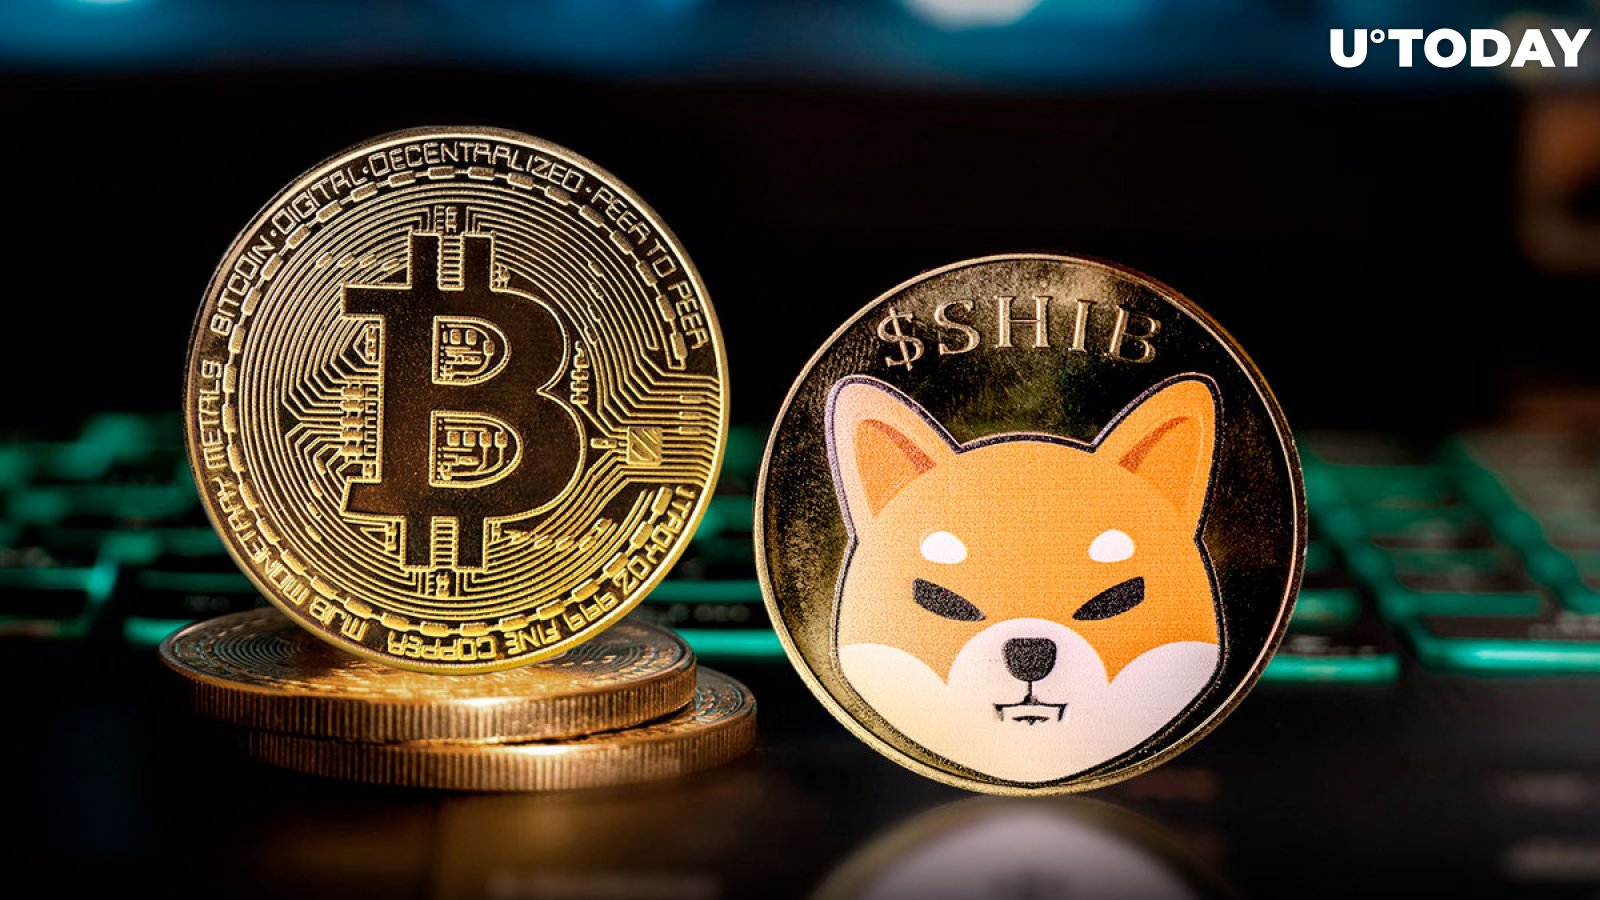 SHIB Executive Shares Crucial Message About Shiba Inu and Bitcoin to Community